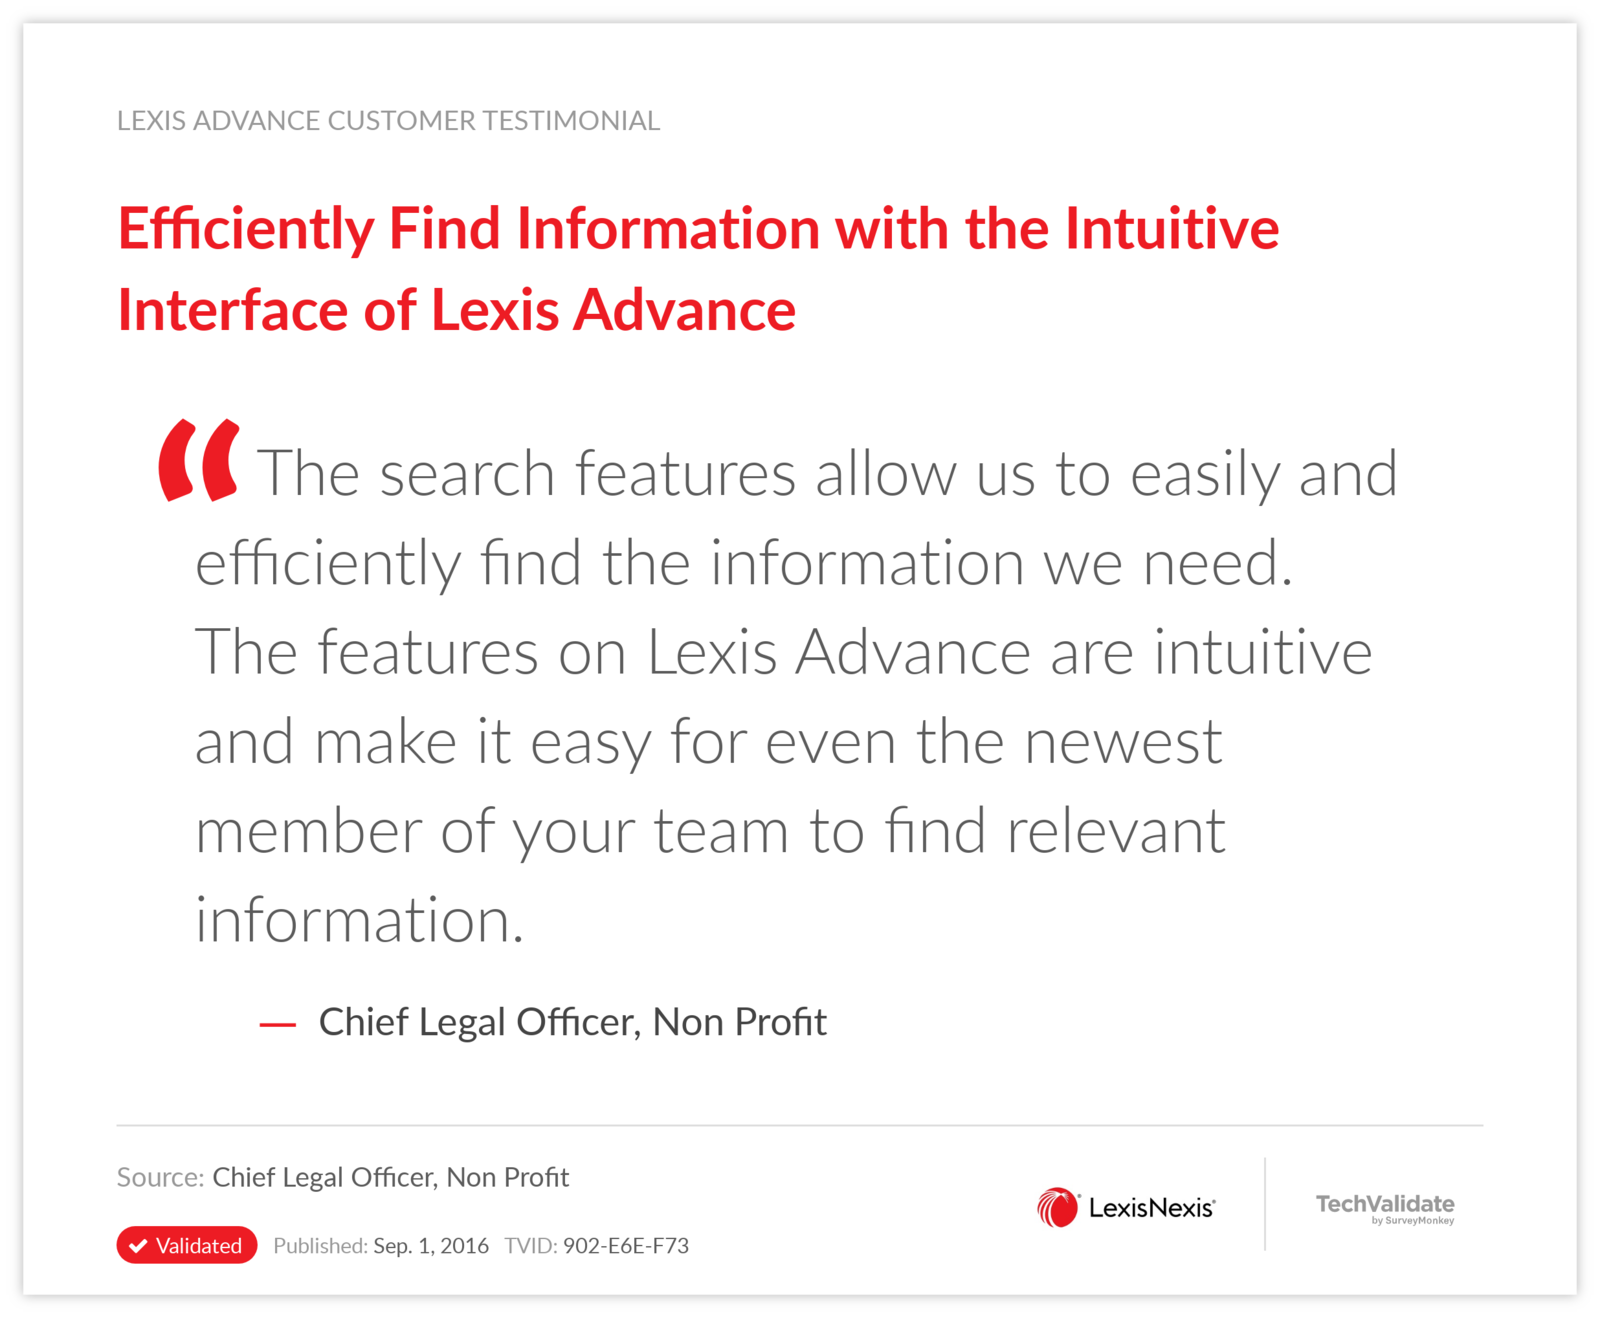 Efficiently Find Information with the Intuitive Interface of Lexis Advance